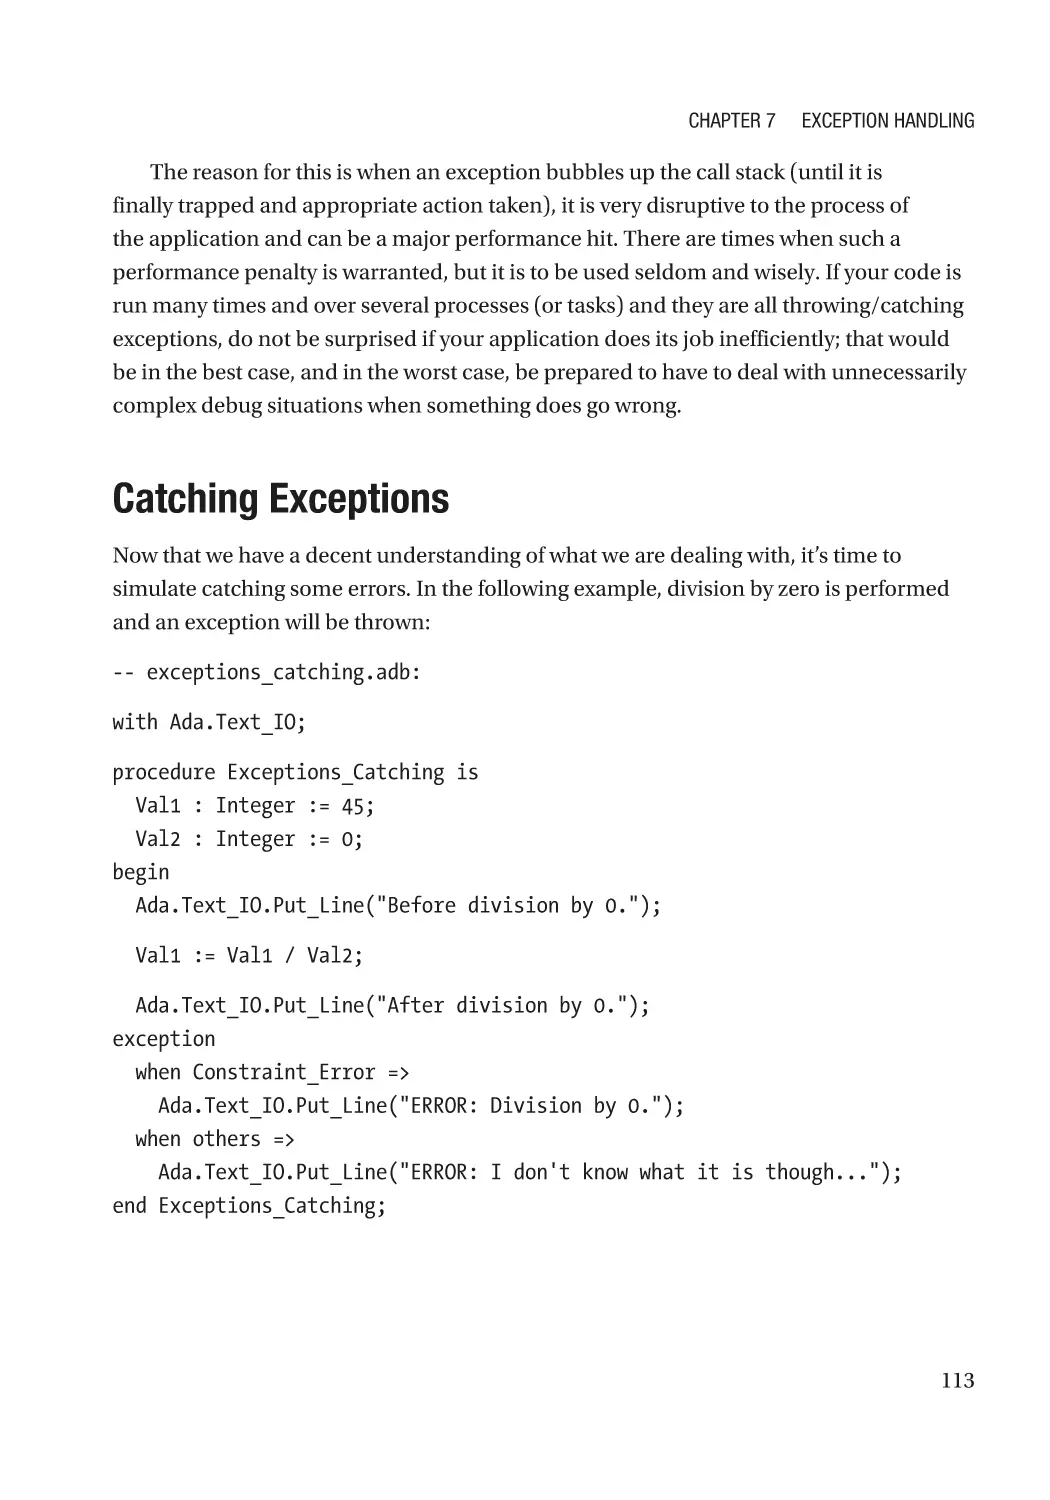 Catching Exceptions